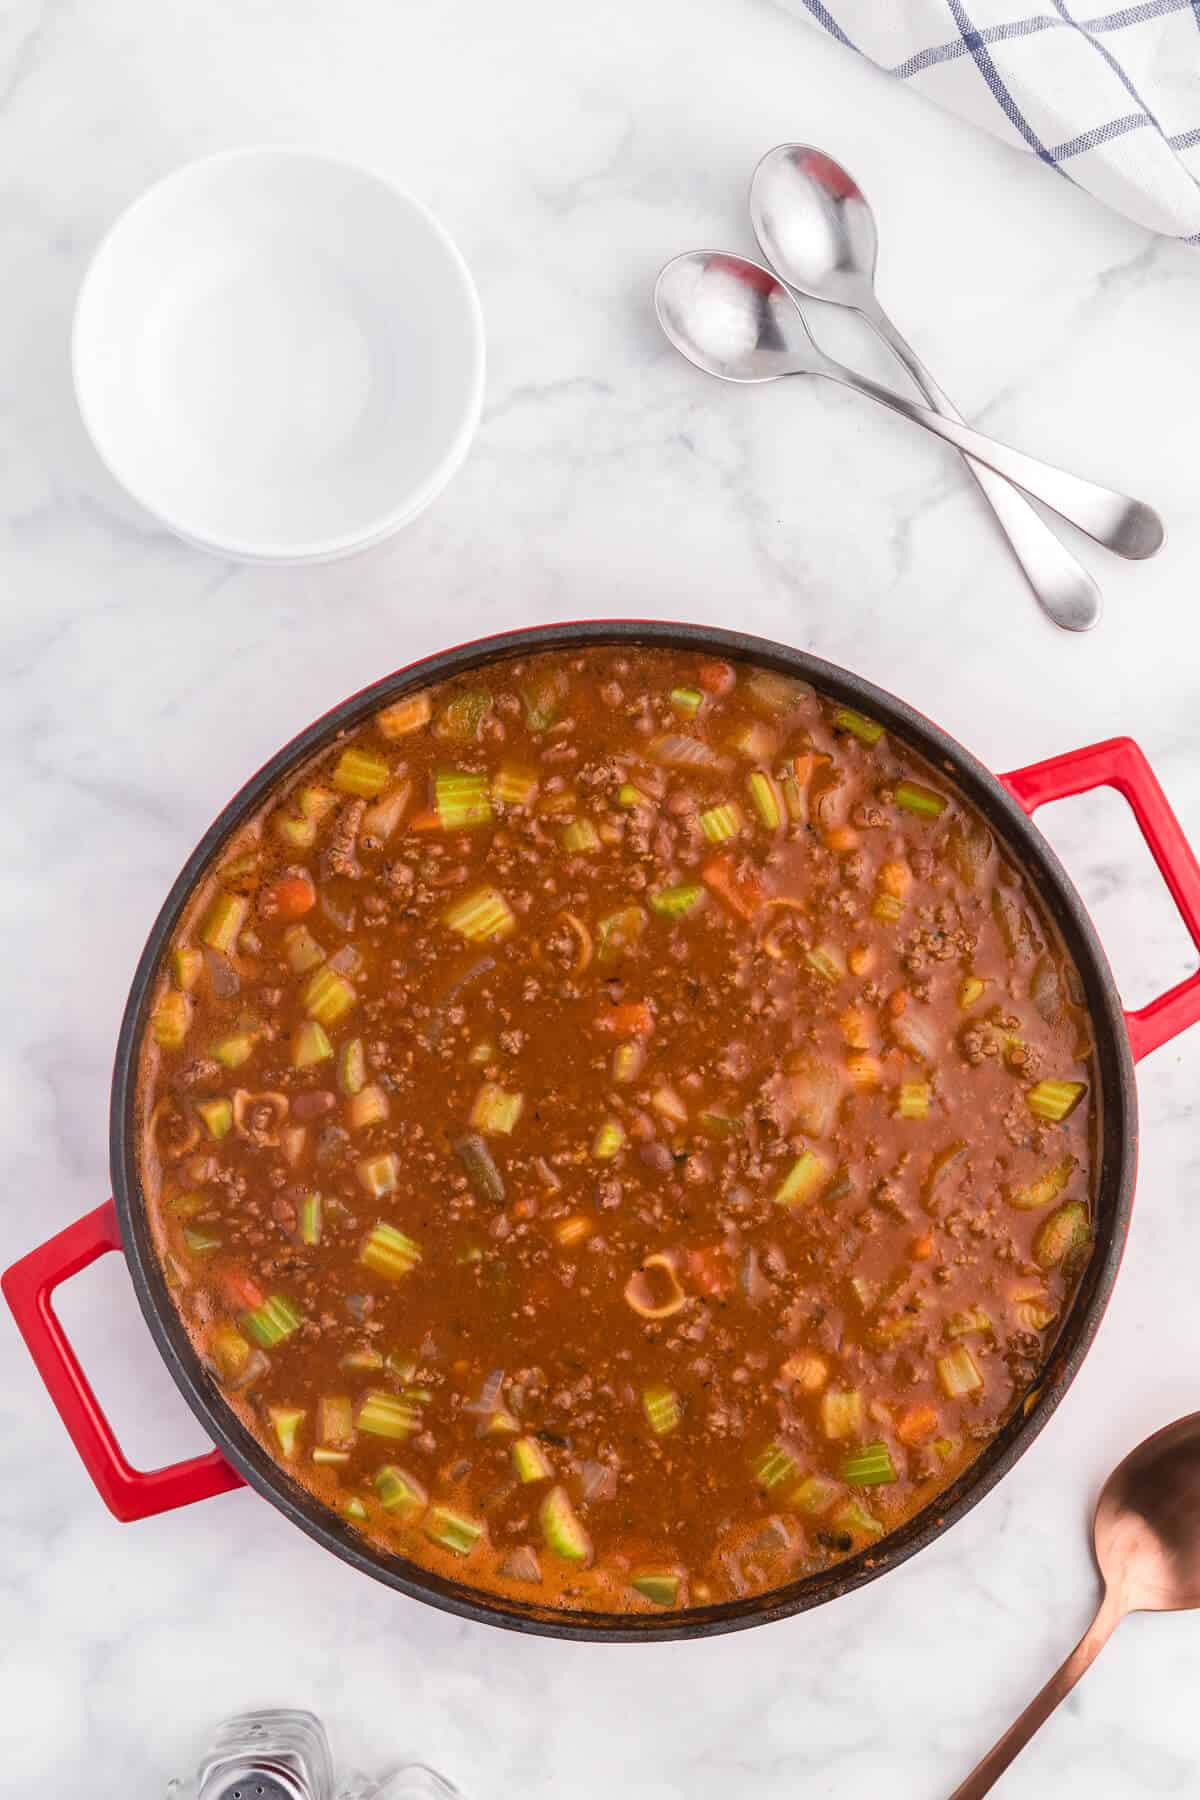 Hodge Podge Soup - A hearty soup recipe like grandma used to make. It's a clean out your kitchen kind of meal with two cans of soup, pork and beans, ground beef and celery. Perfect for busy days!